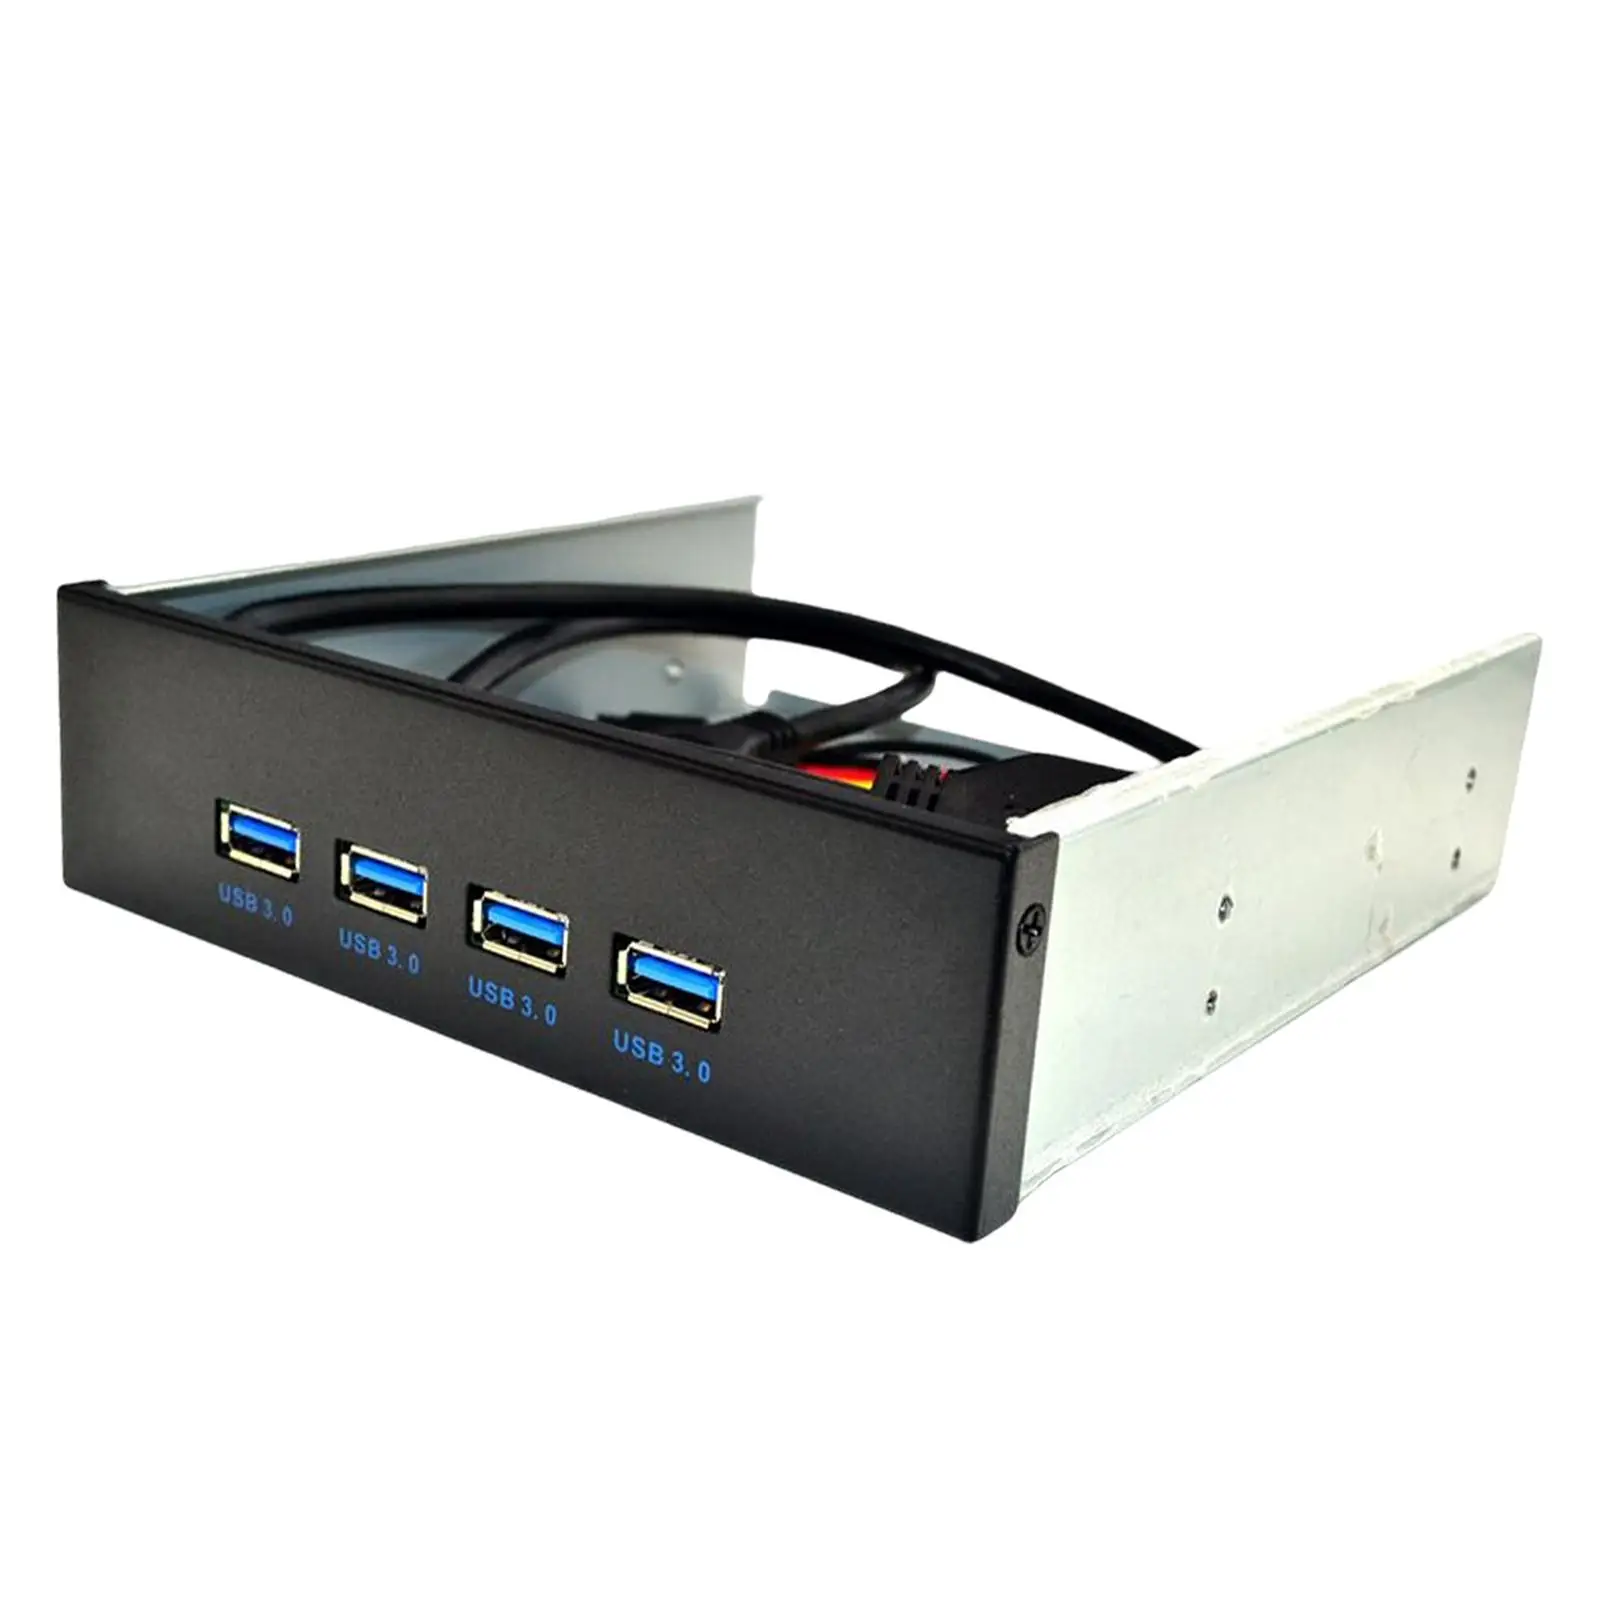 5.25 inch Optical Drive Front Panel 4xUSB3.0 High Speed Multifunction Plug and Play USB 3.0 Hub for Desktop PC Computer